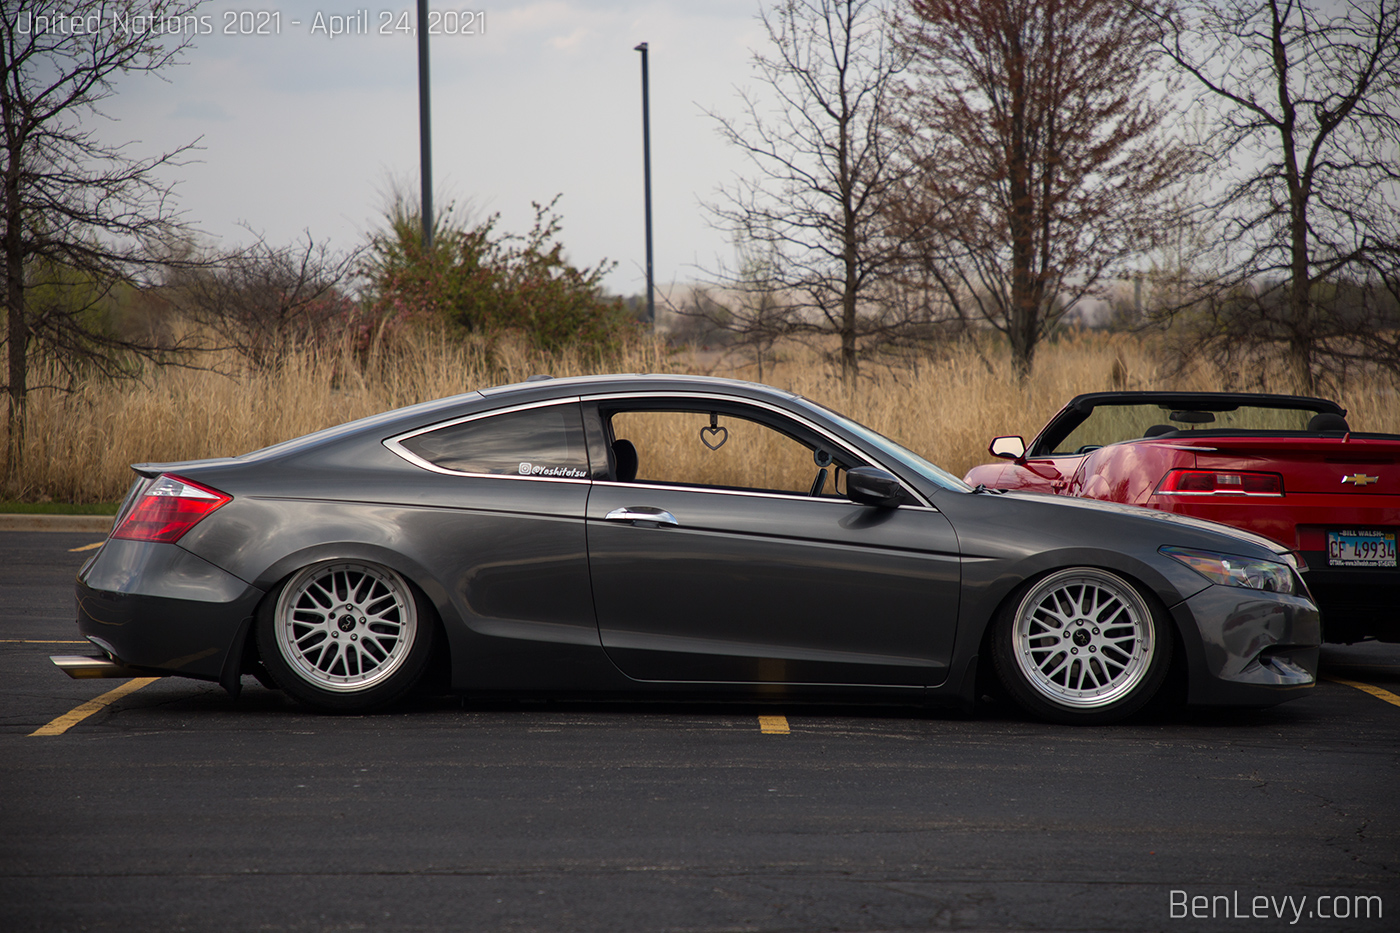 Bagged Accord Coupe that won Best Stance at United Nations